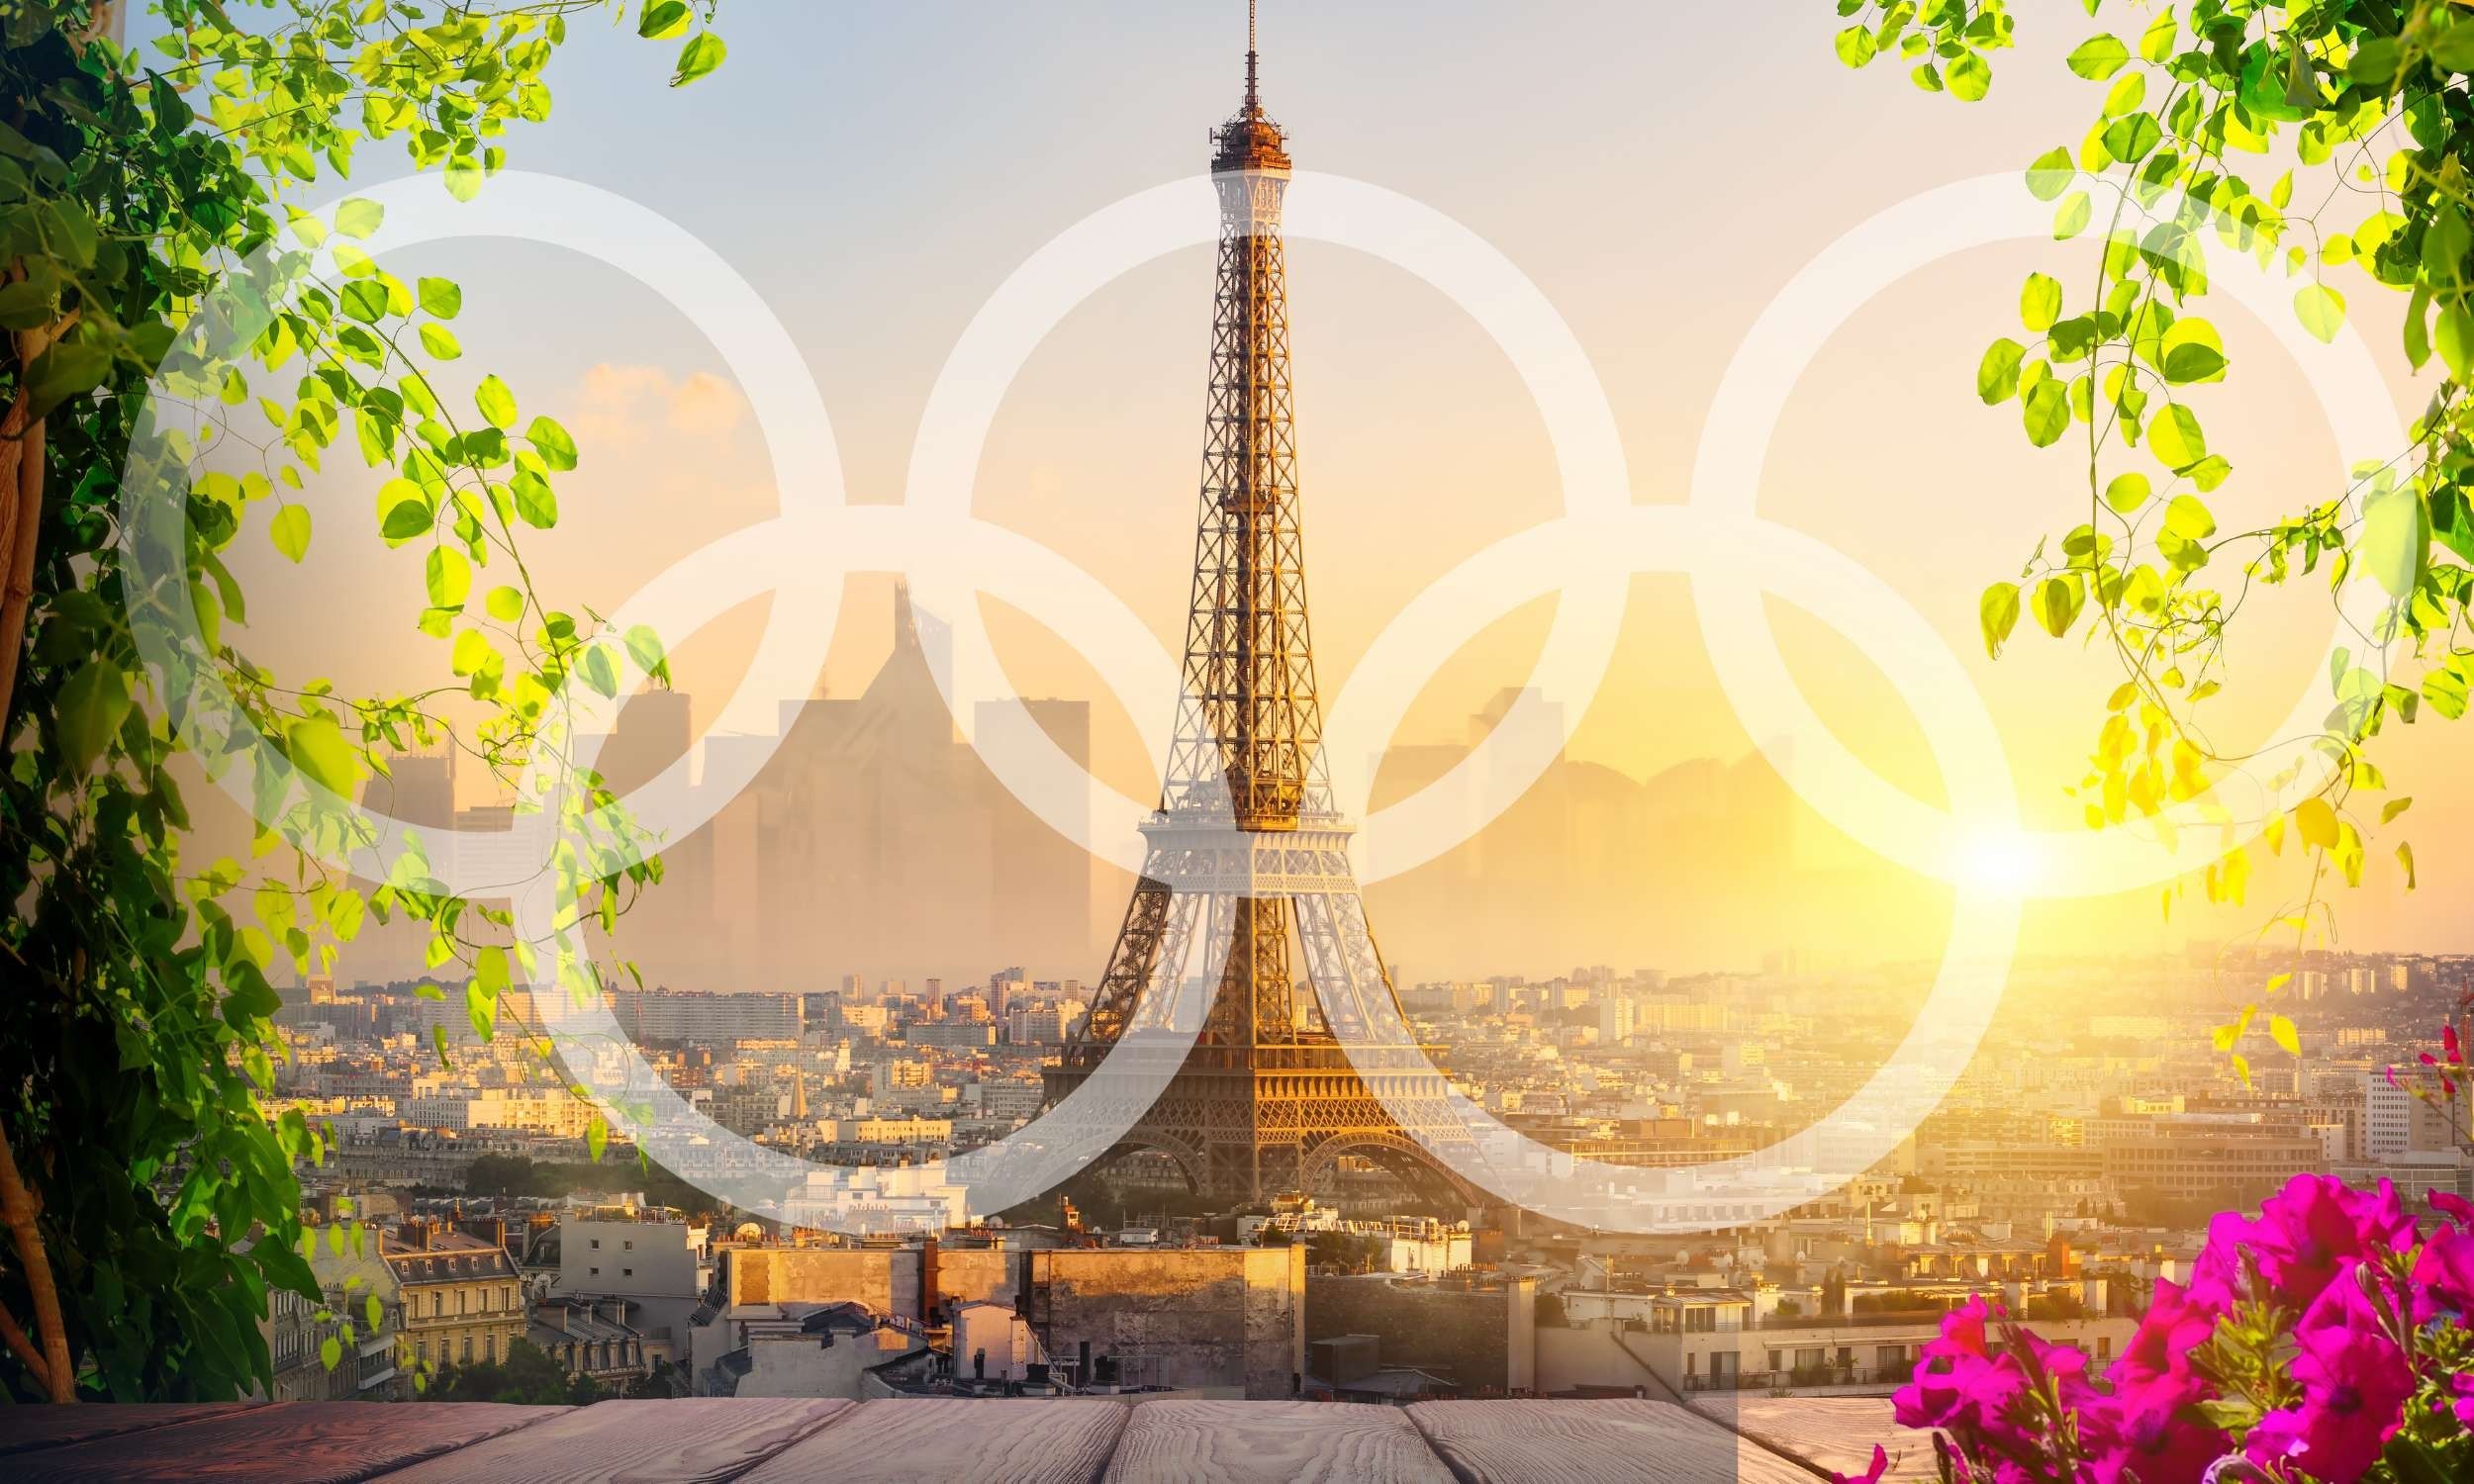 Paris Olympics 2024 Opening Ceremony Under Threat After Terrorist Attack In Russia